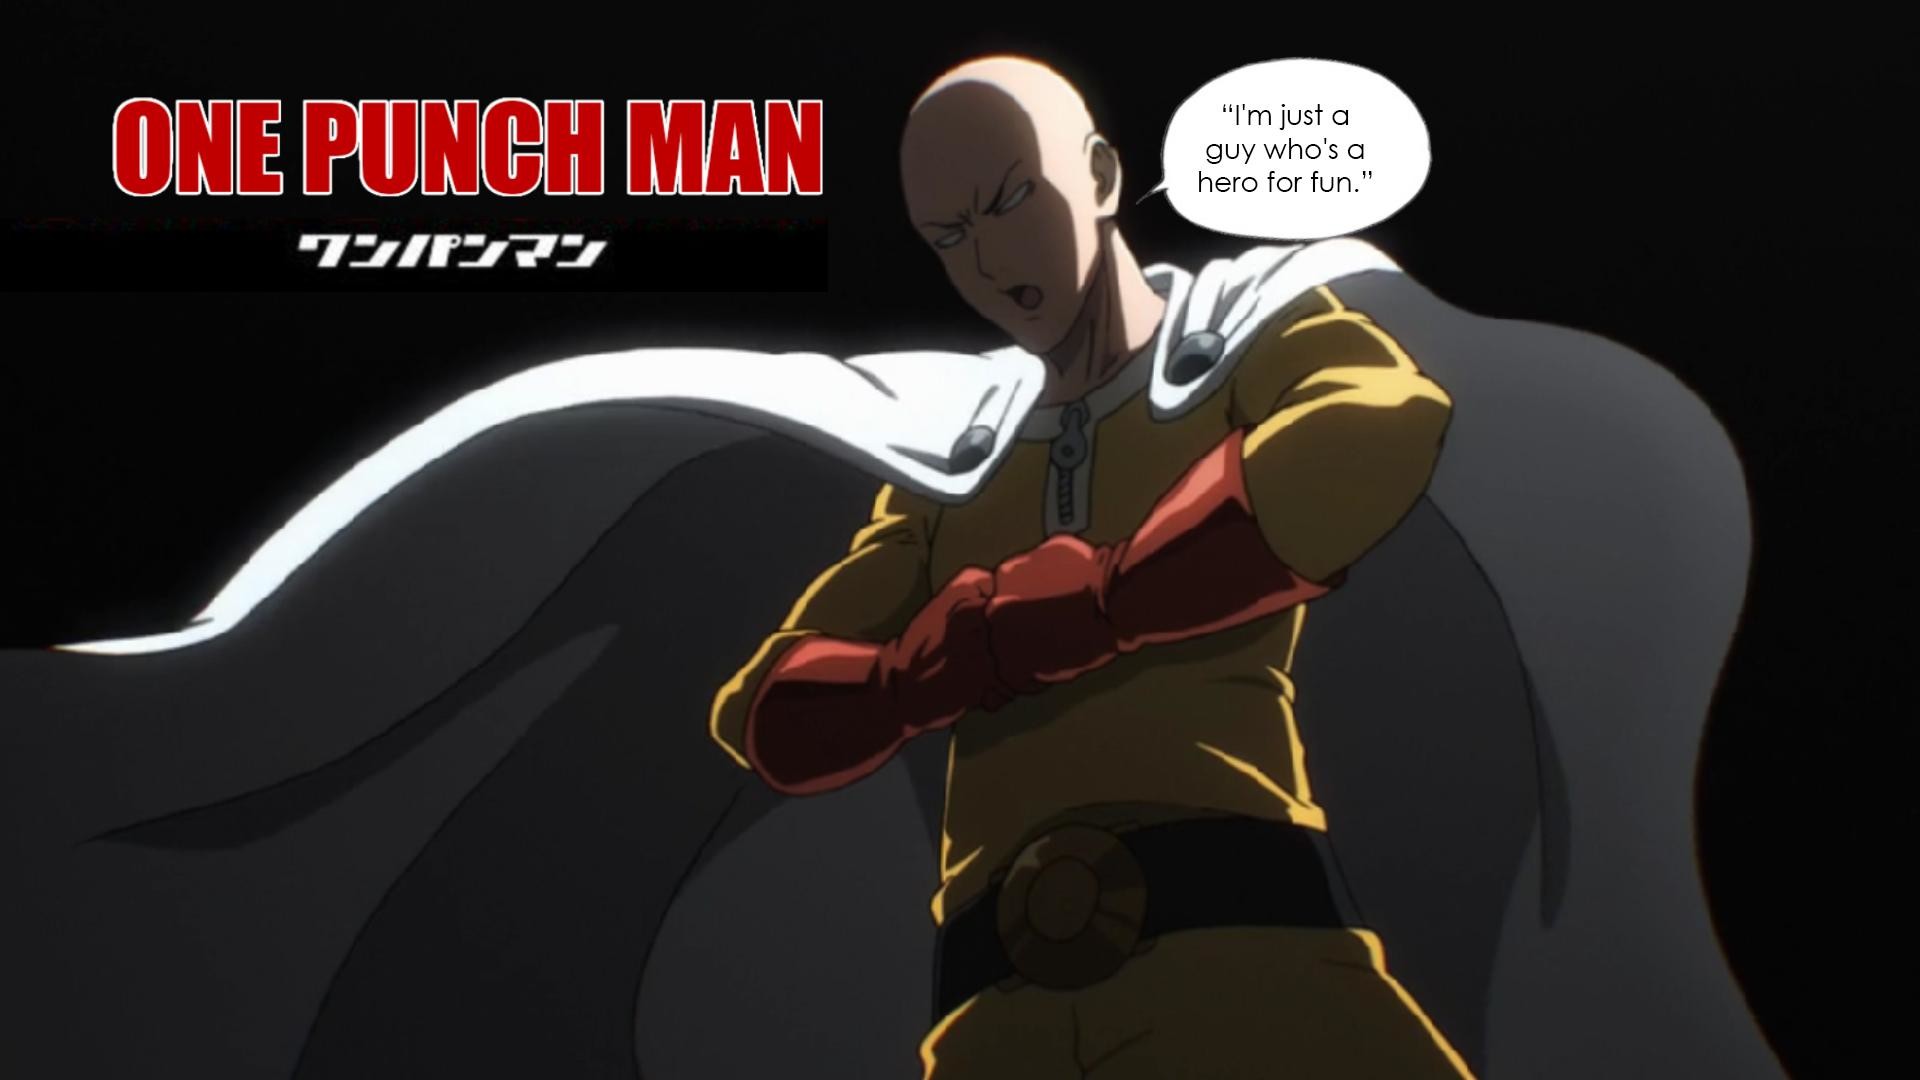 1920x1080 One Punch Man [] Need #iPhone #6S #Plus #Wallpaper/